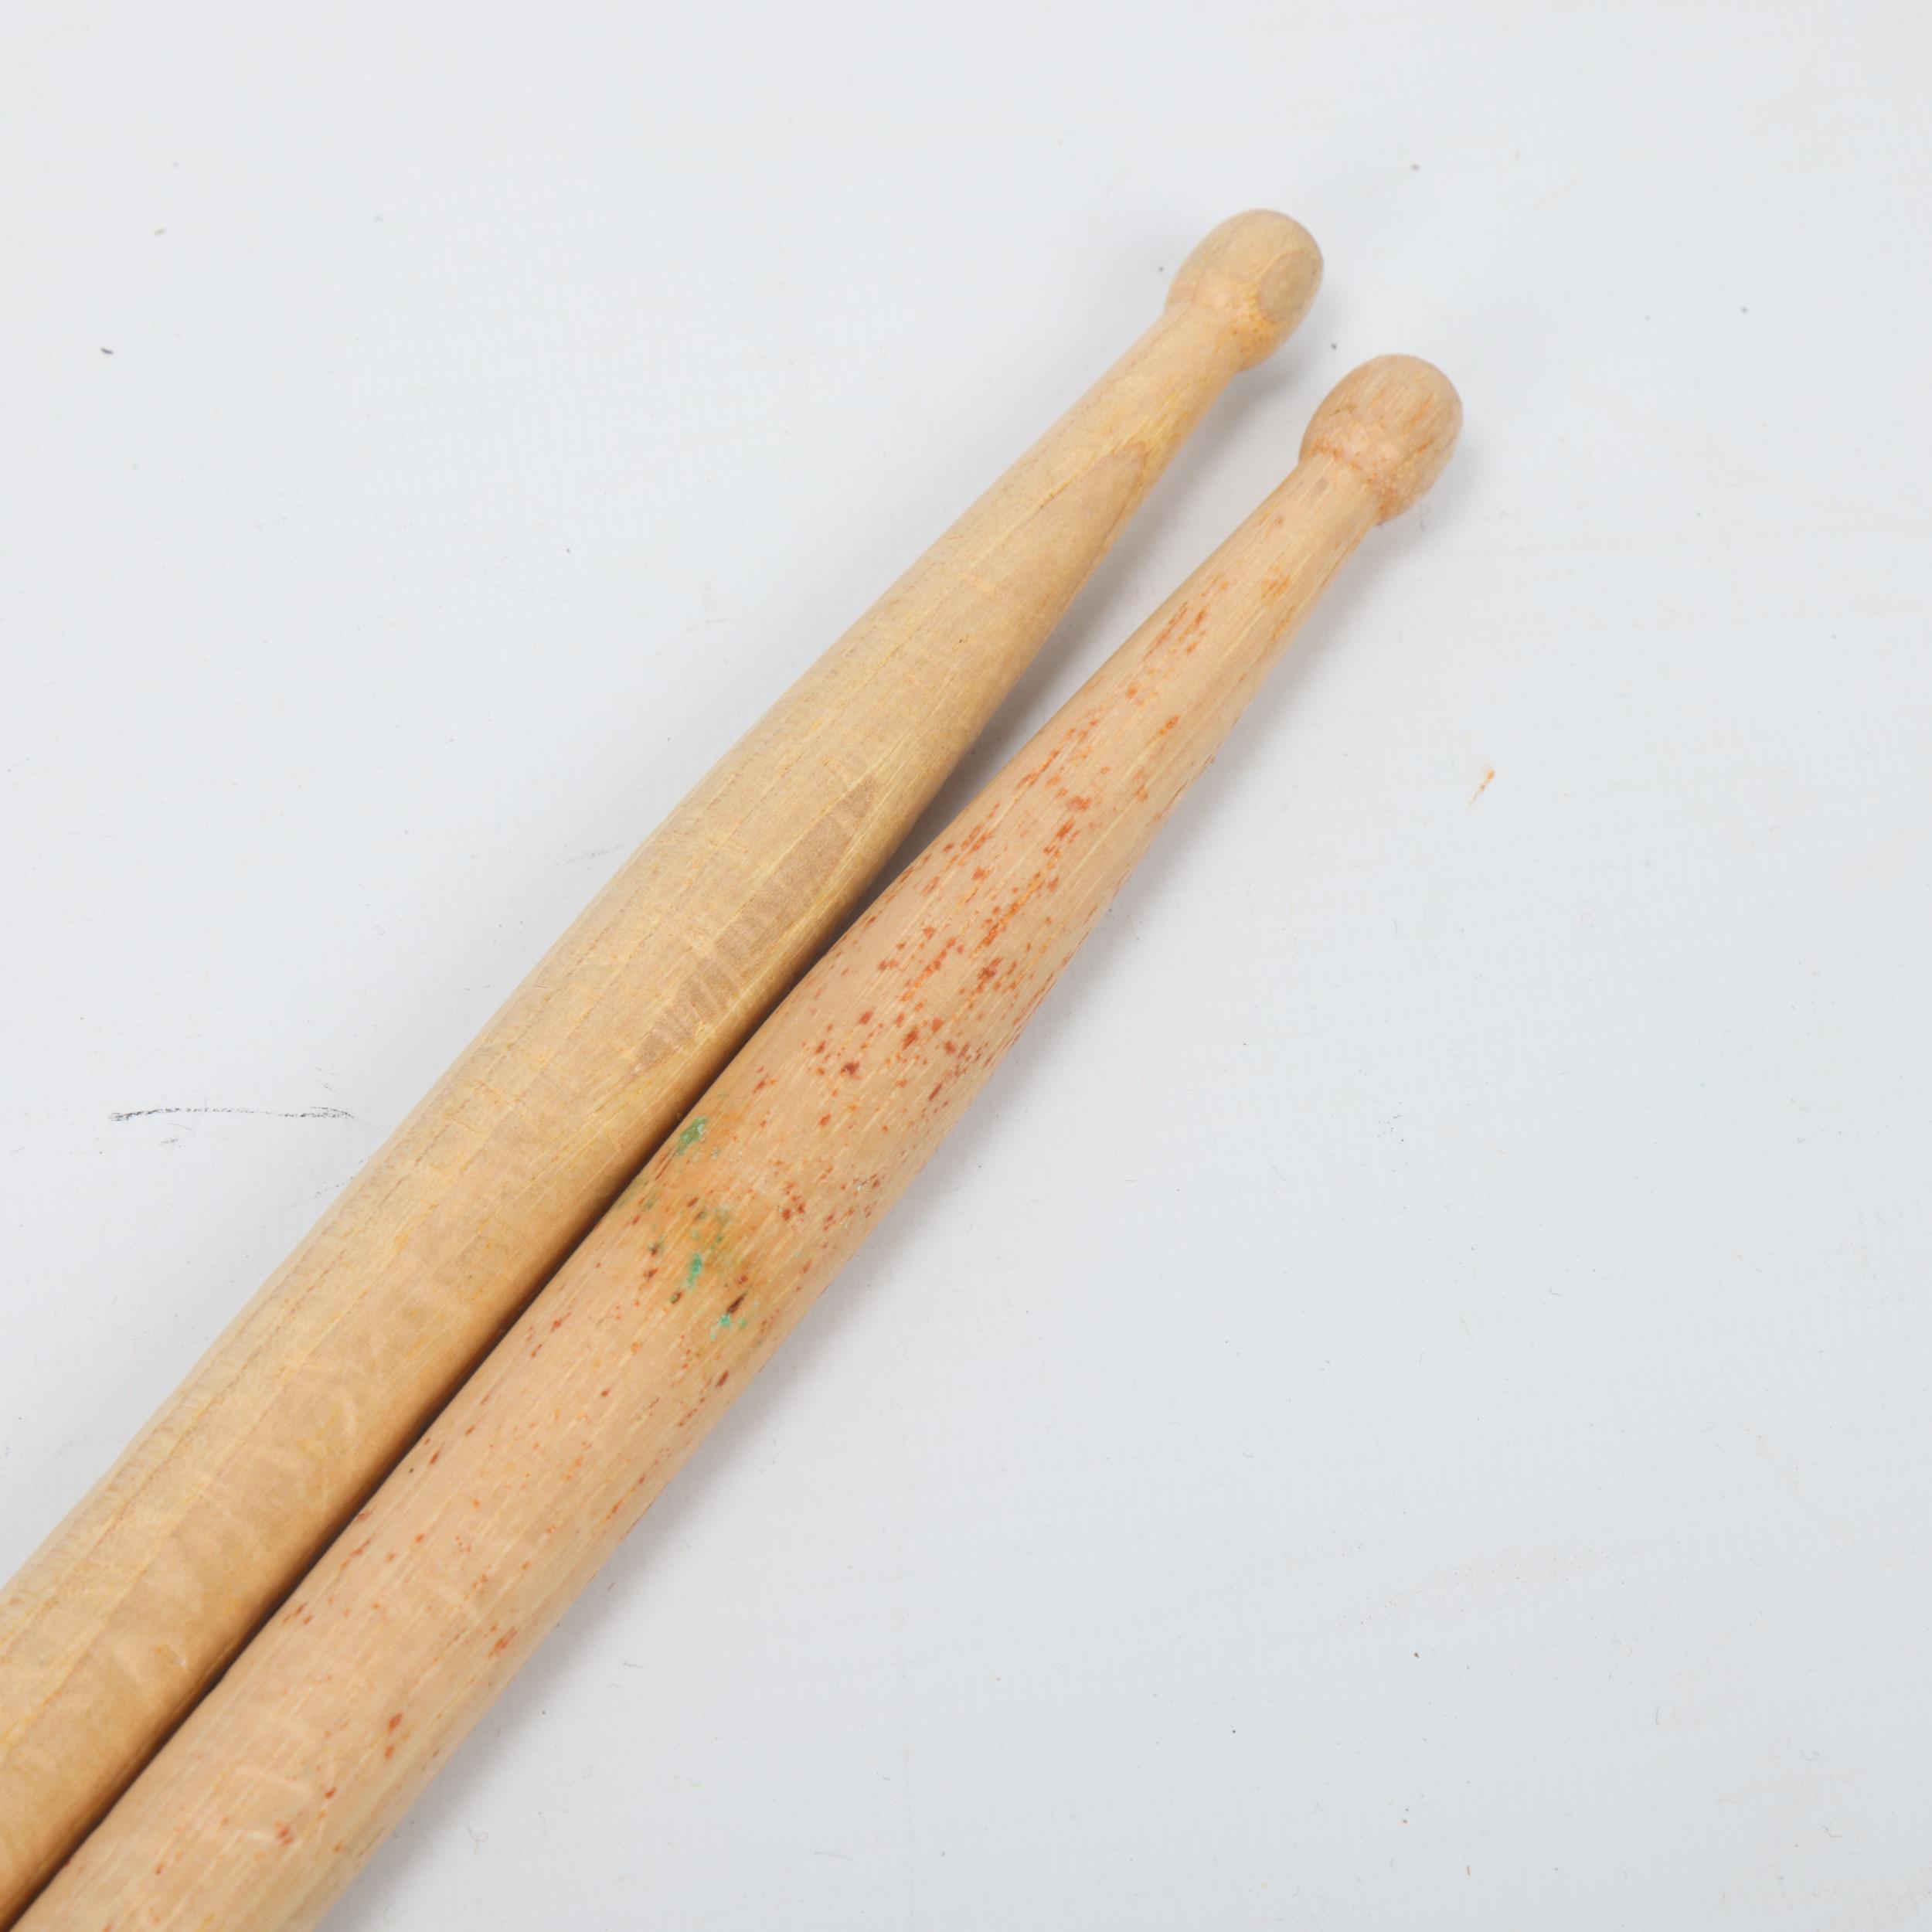 Two USED 'VATER - POWERLINE 5B' Hickory DRUMSTICKS belonging to MITCH MITCHELL. - Image 3 of 3